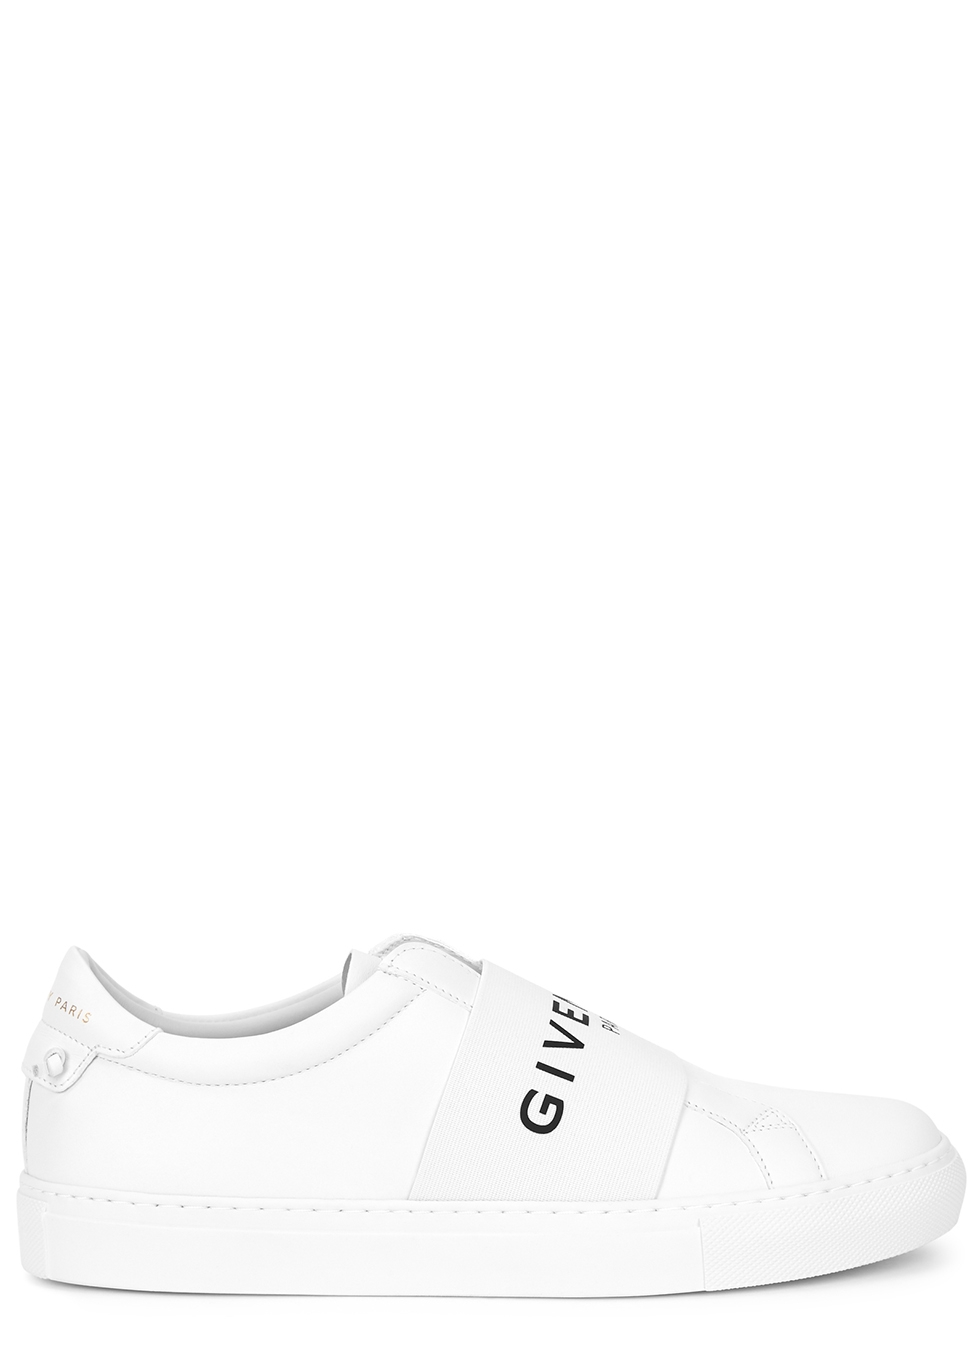 Givenchy Urban Street white leather sneakers - Harvey Nichols